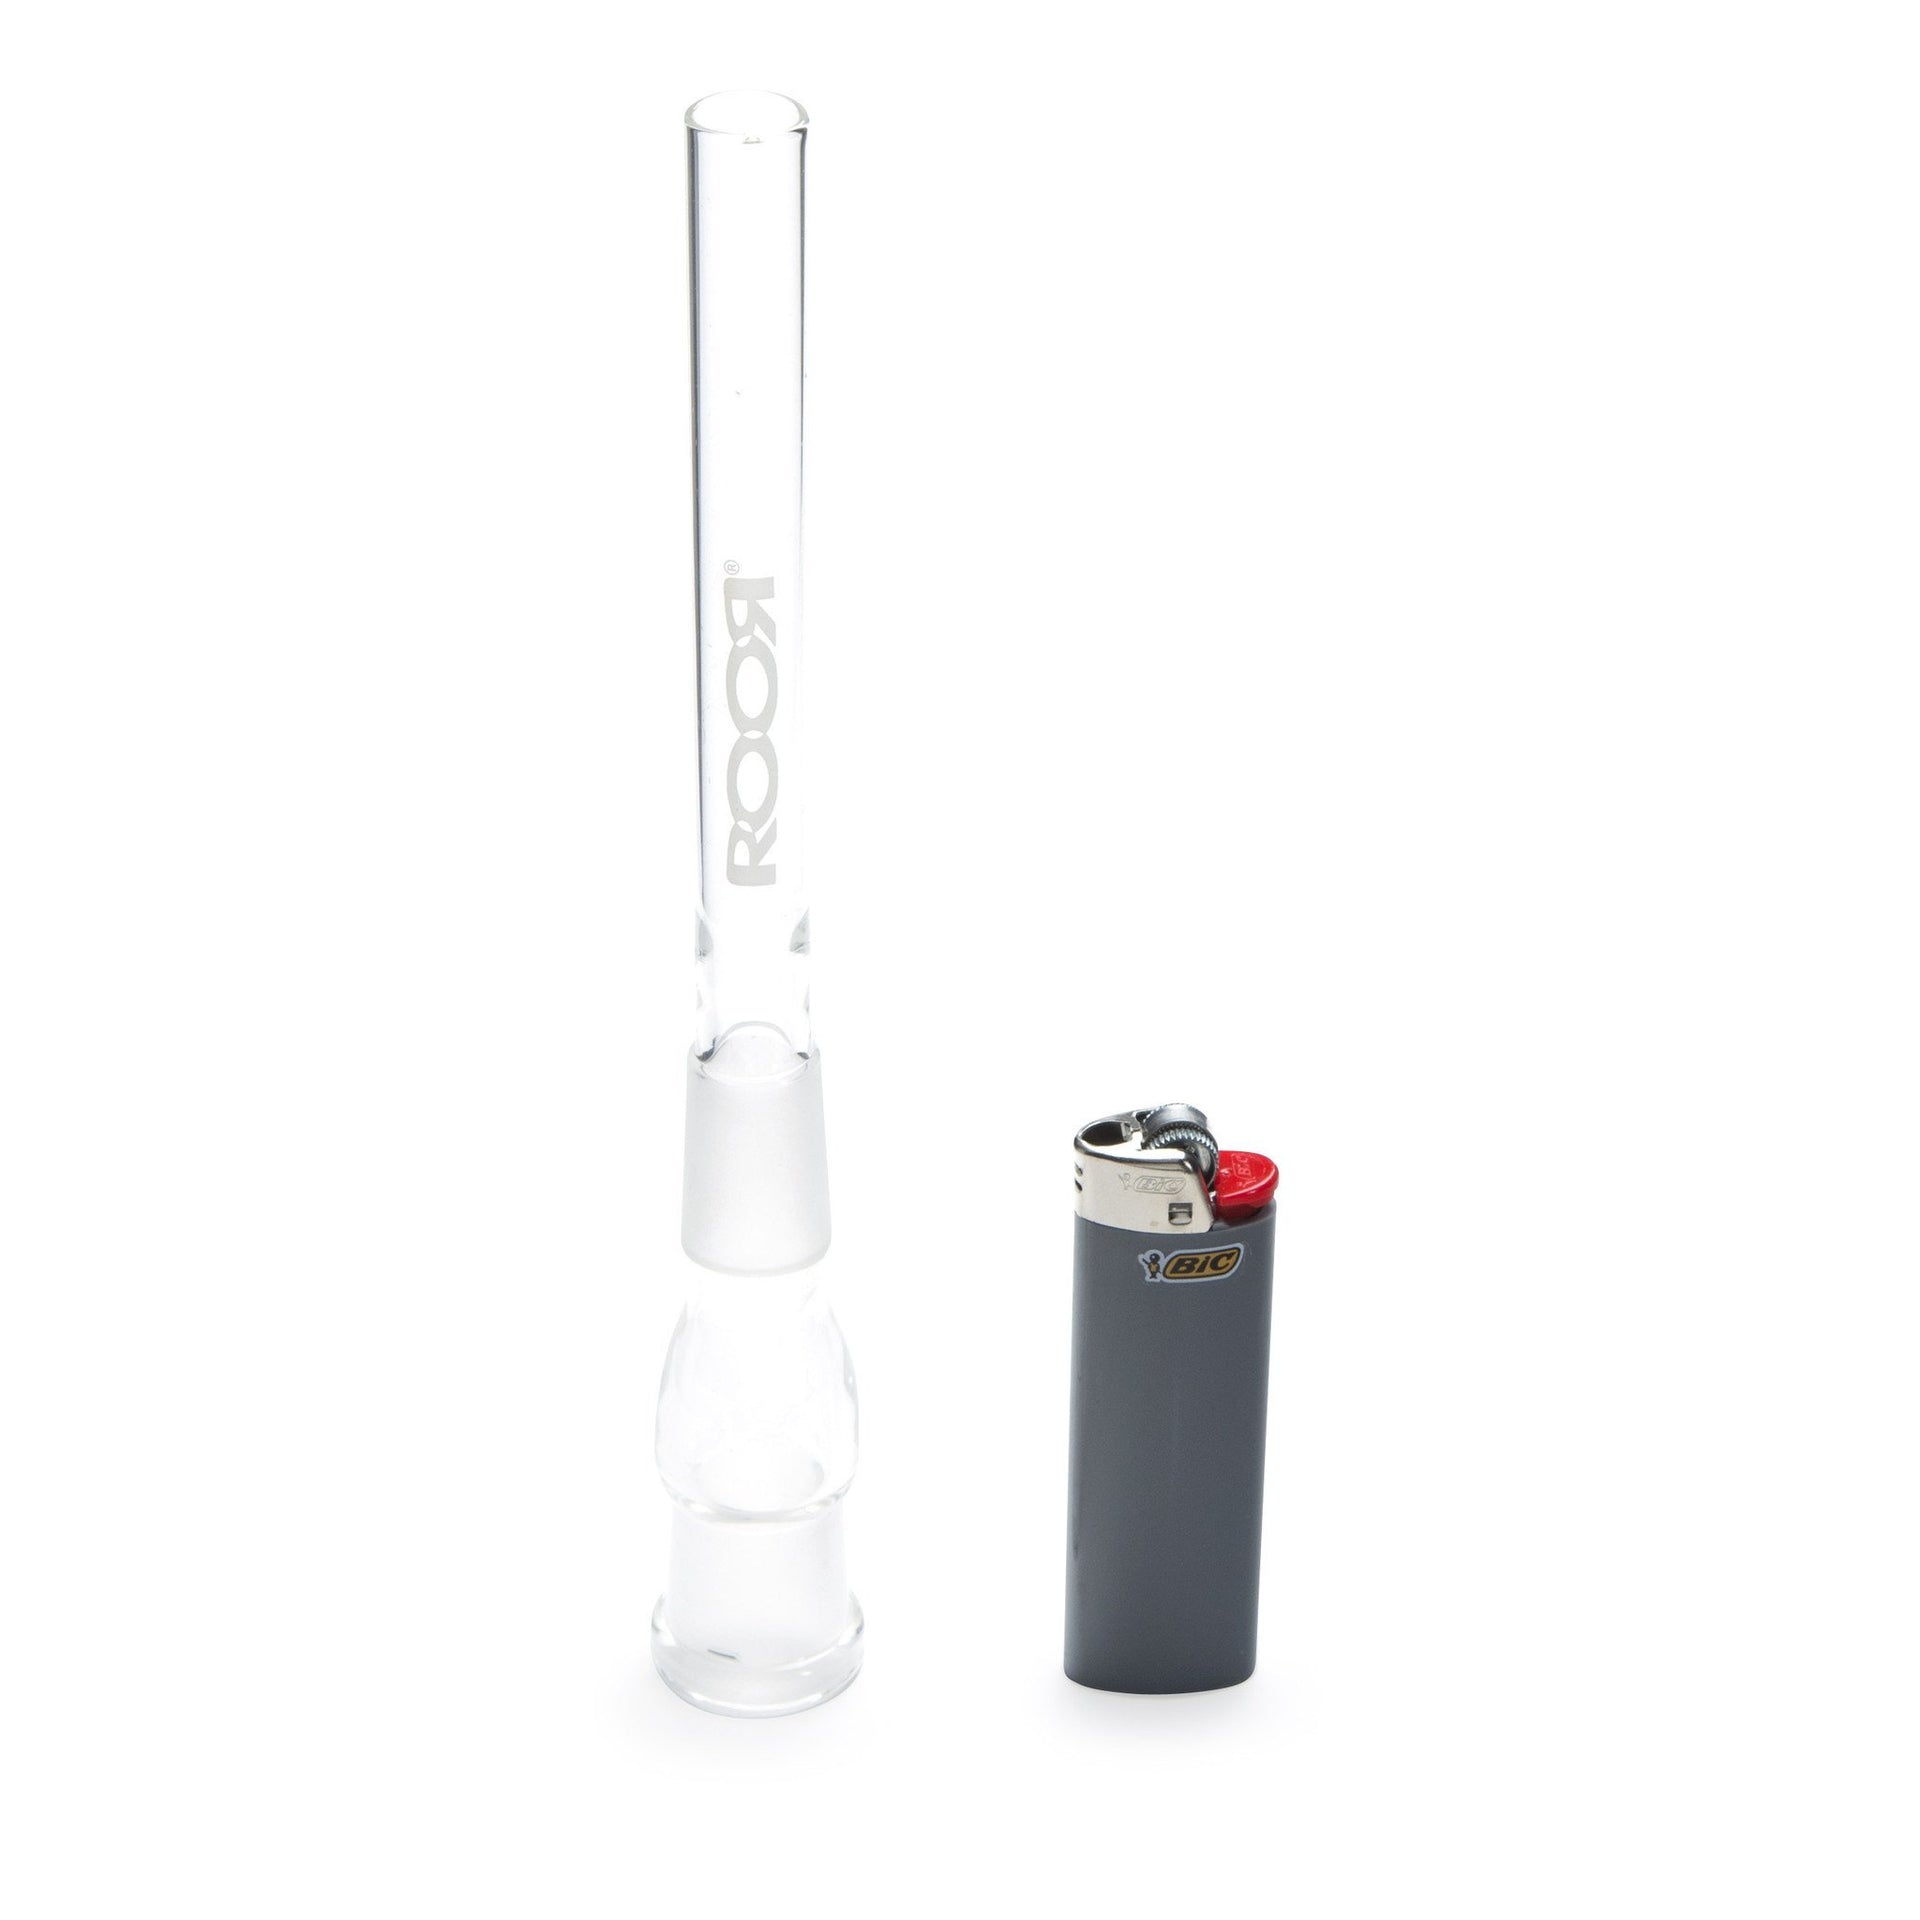 ROOR 18/14mm Downstem 120mm length for Beaker - 420 Science - The most trusted online smoke shop.